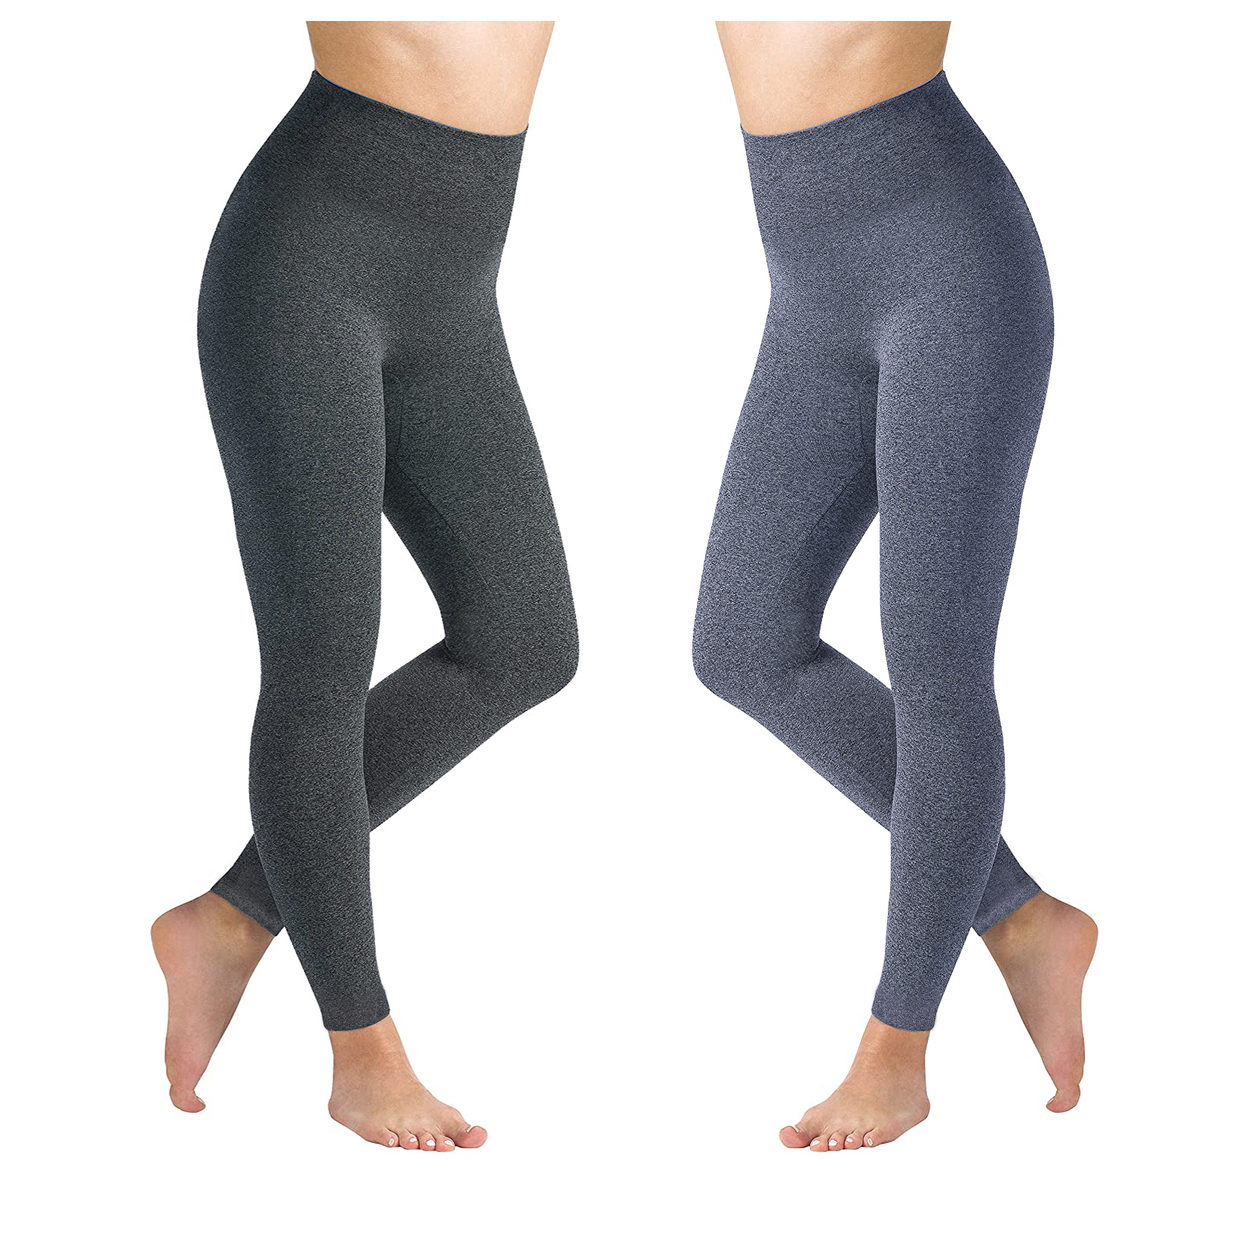 2-Pack: Women's High Waisted Ultra Soft Fleece Lined Warm Marled Leggings(Available In Plus Sizes) - Charcoal & Charcoal, Medium